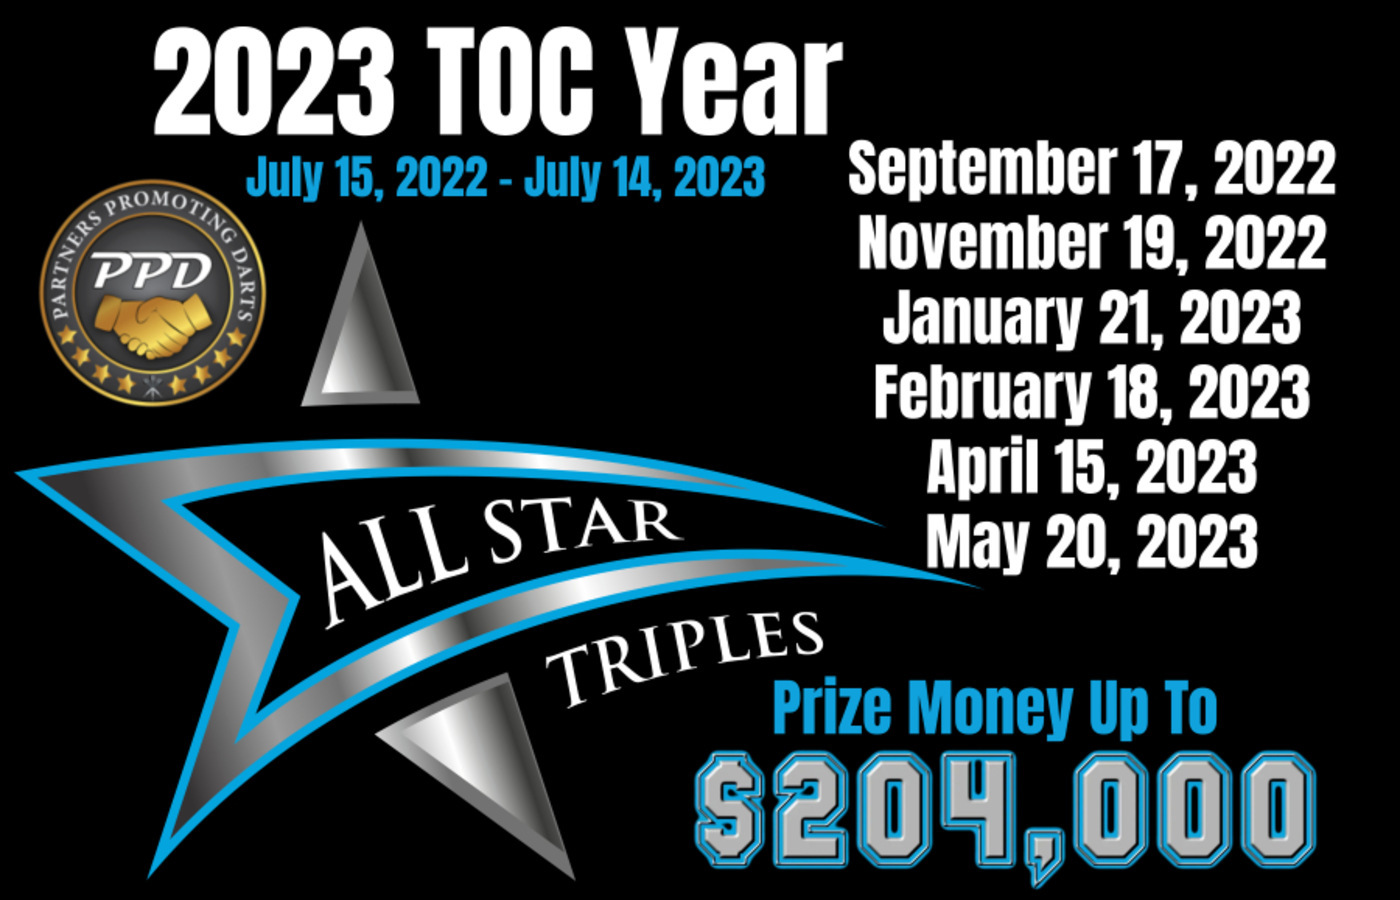 May 20, 2023 - All Star Triples Image